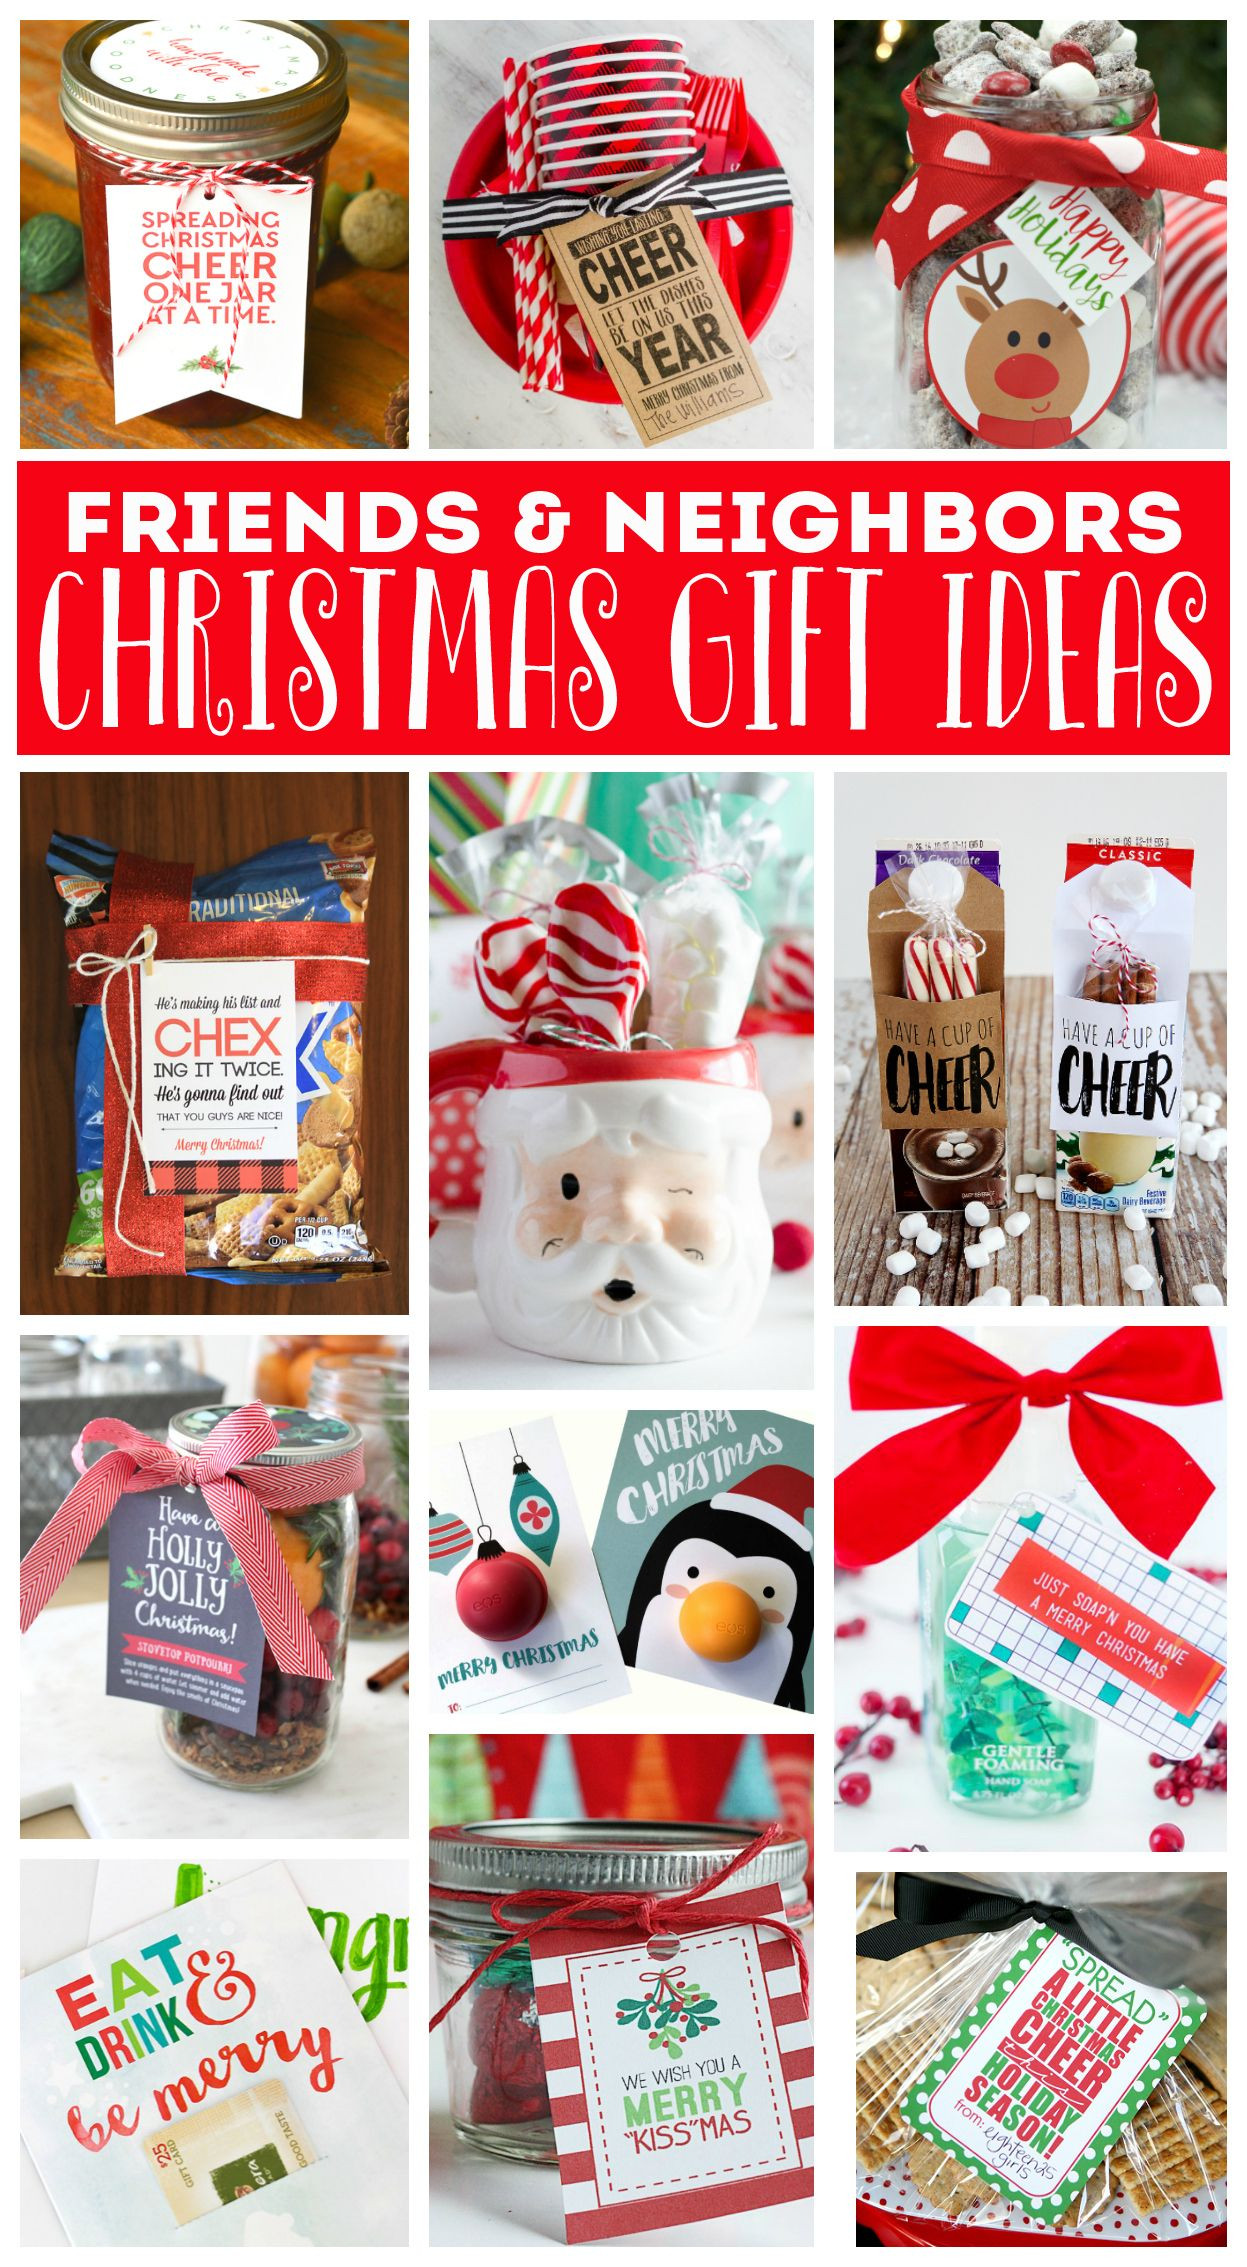 Holiday Gift Ideas For Neighbors
 Neighbor Christmas Gifts Everyone Is Sure To Love